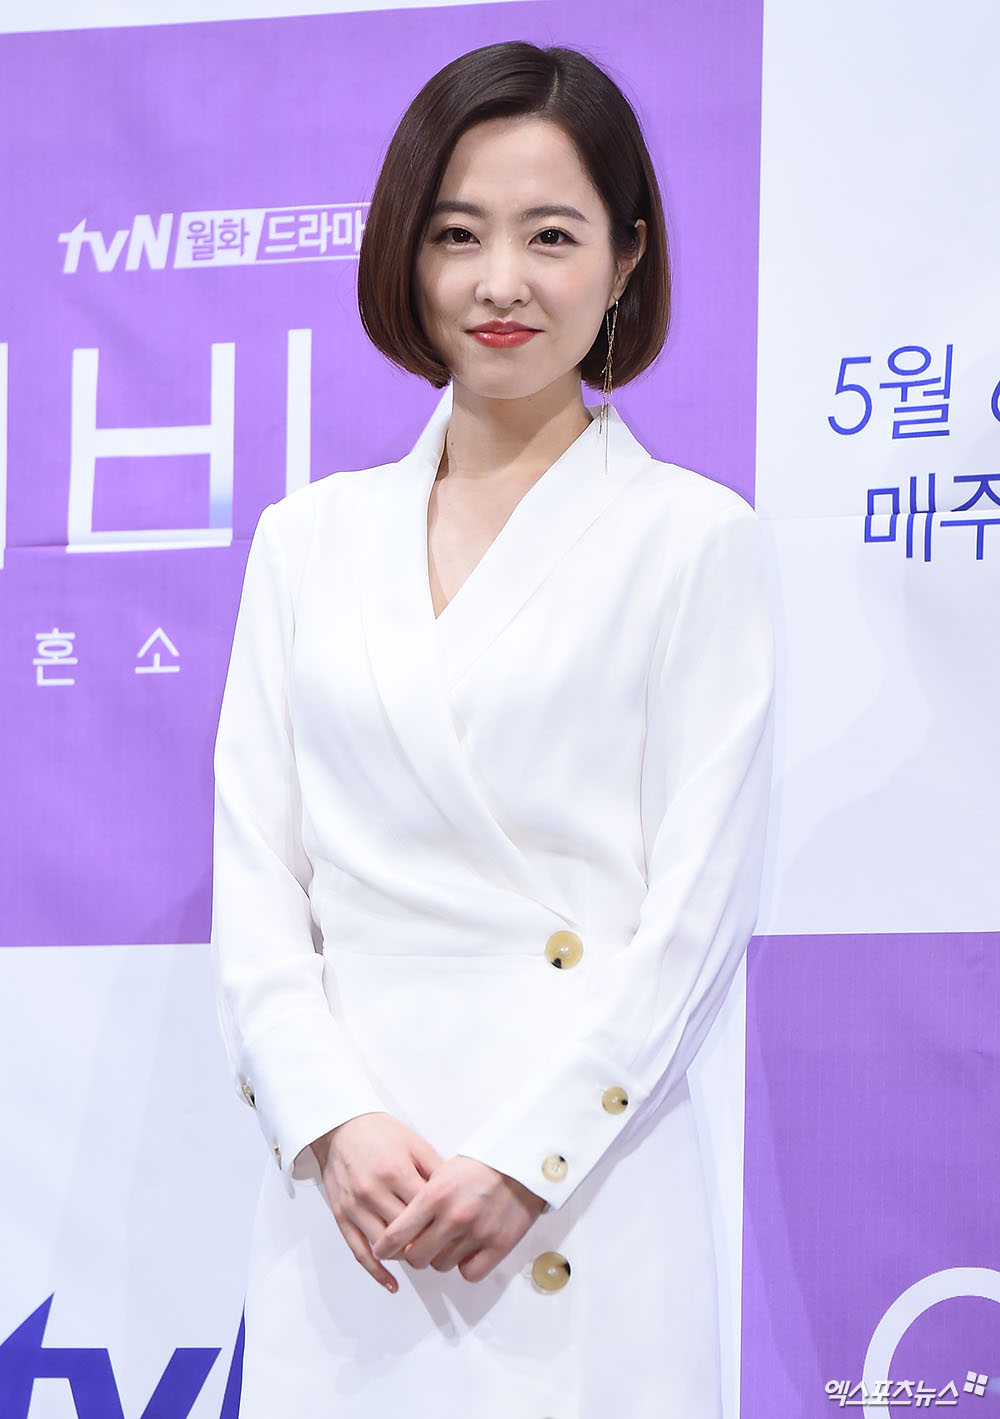 Actor Park Bo-young, who attended the TVN New Moon drama Abyss production presentation held at Imperial Palace Hotel in Nonhyeon-dong, Seoul on the afternoon of the 3rd, is posing.The doll walks.Poblis is back.Sniper eye contact.The most cute fight in the world.This beauty, I call you a single-stroke disease.